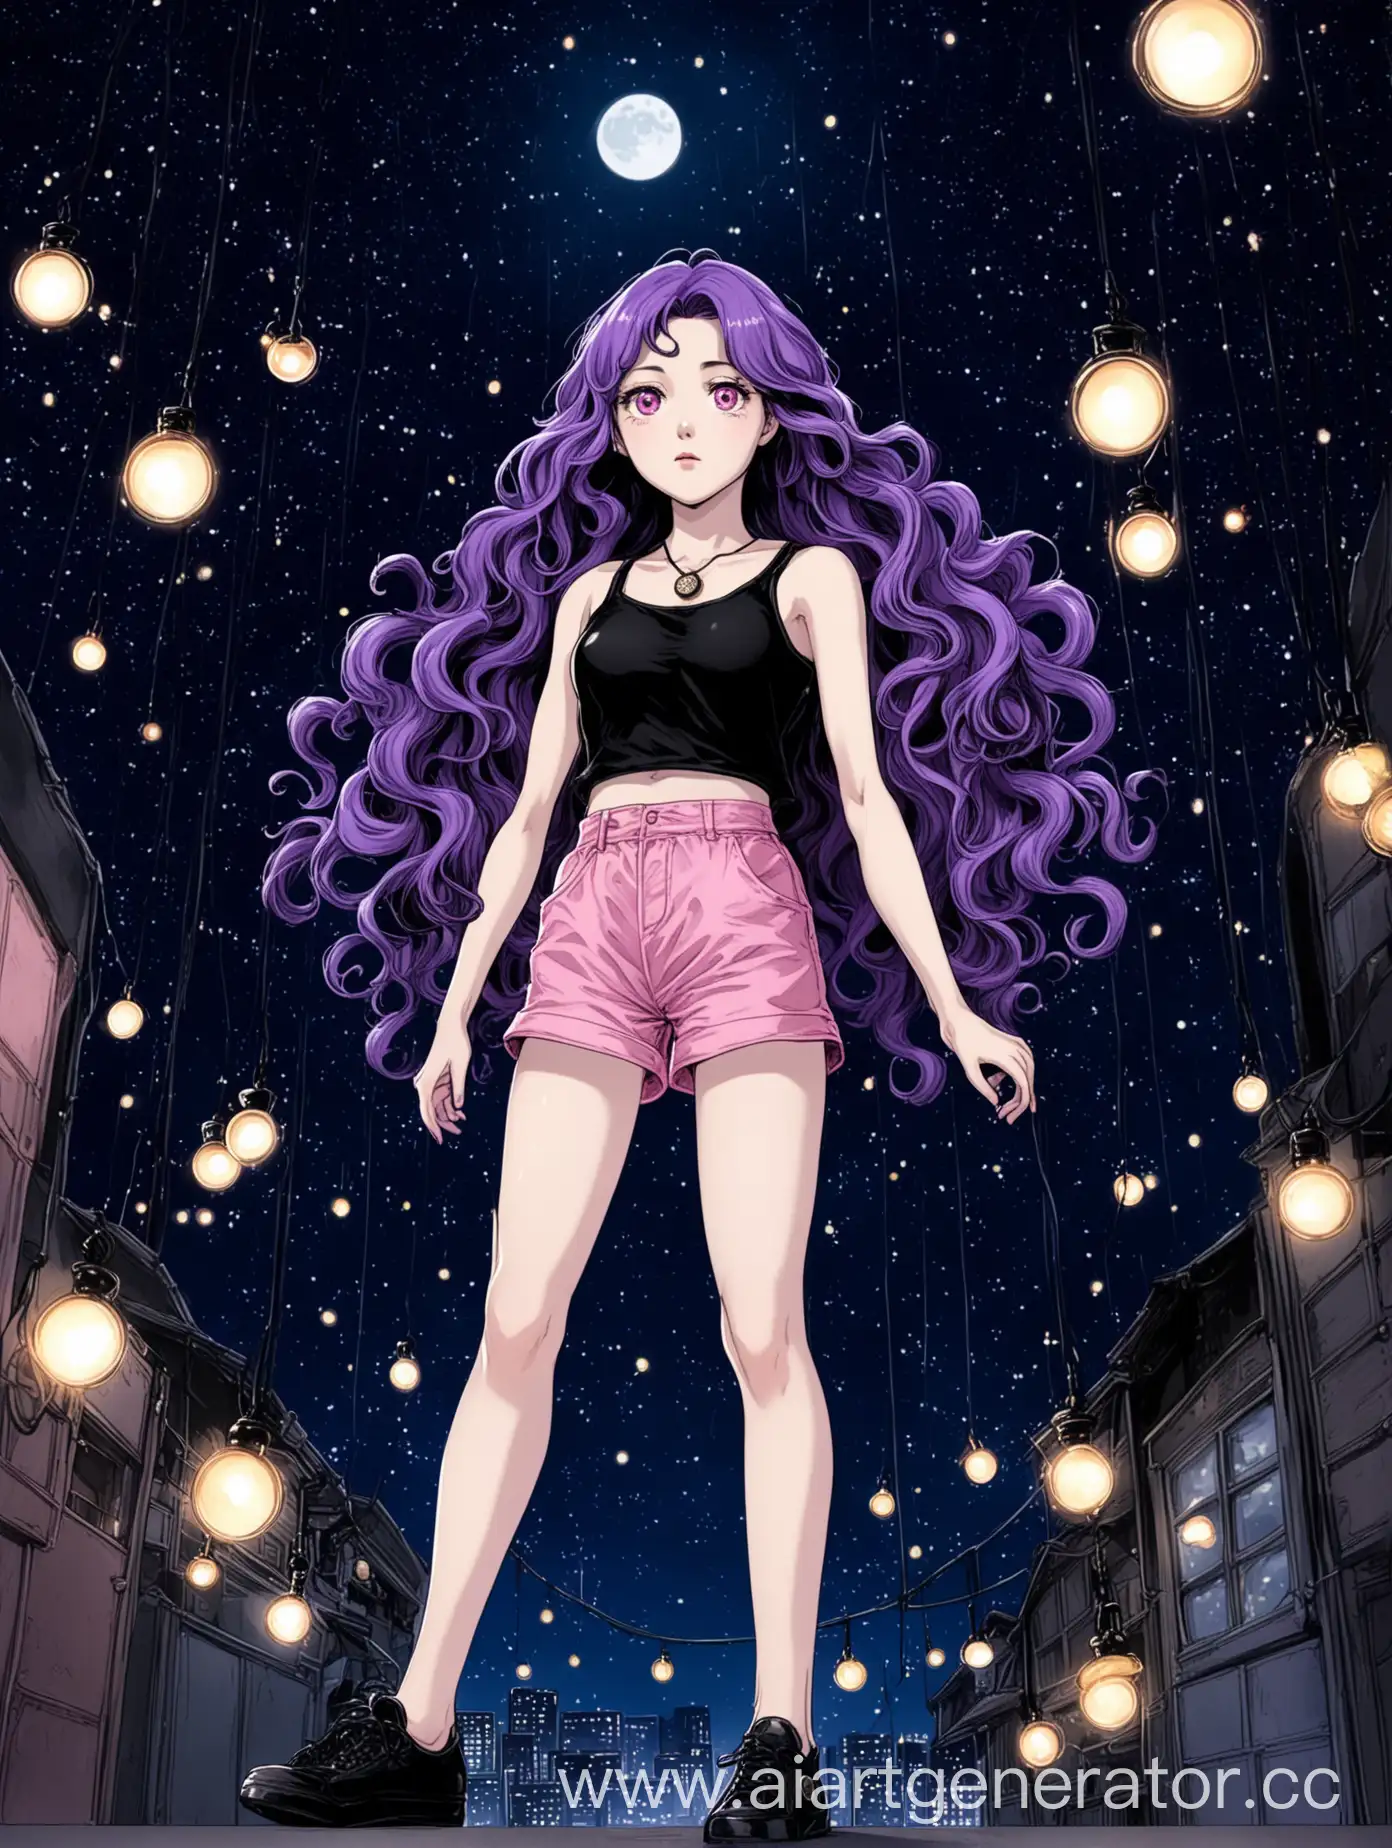 Teenage-Girl-with-Curly-Purple-Hair-and-Pocket-Watches-in-Night-Sky